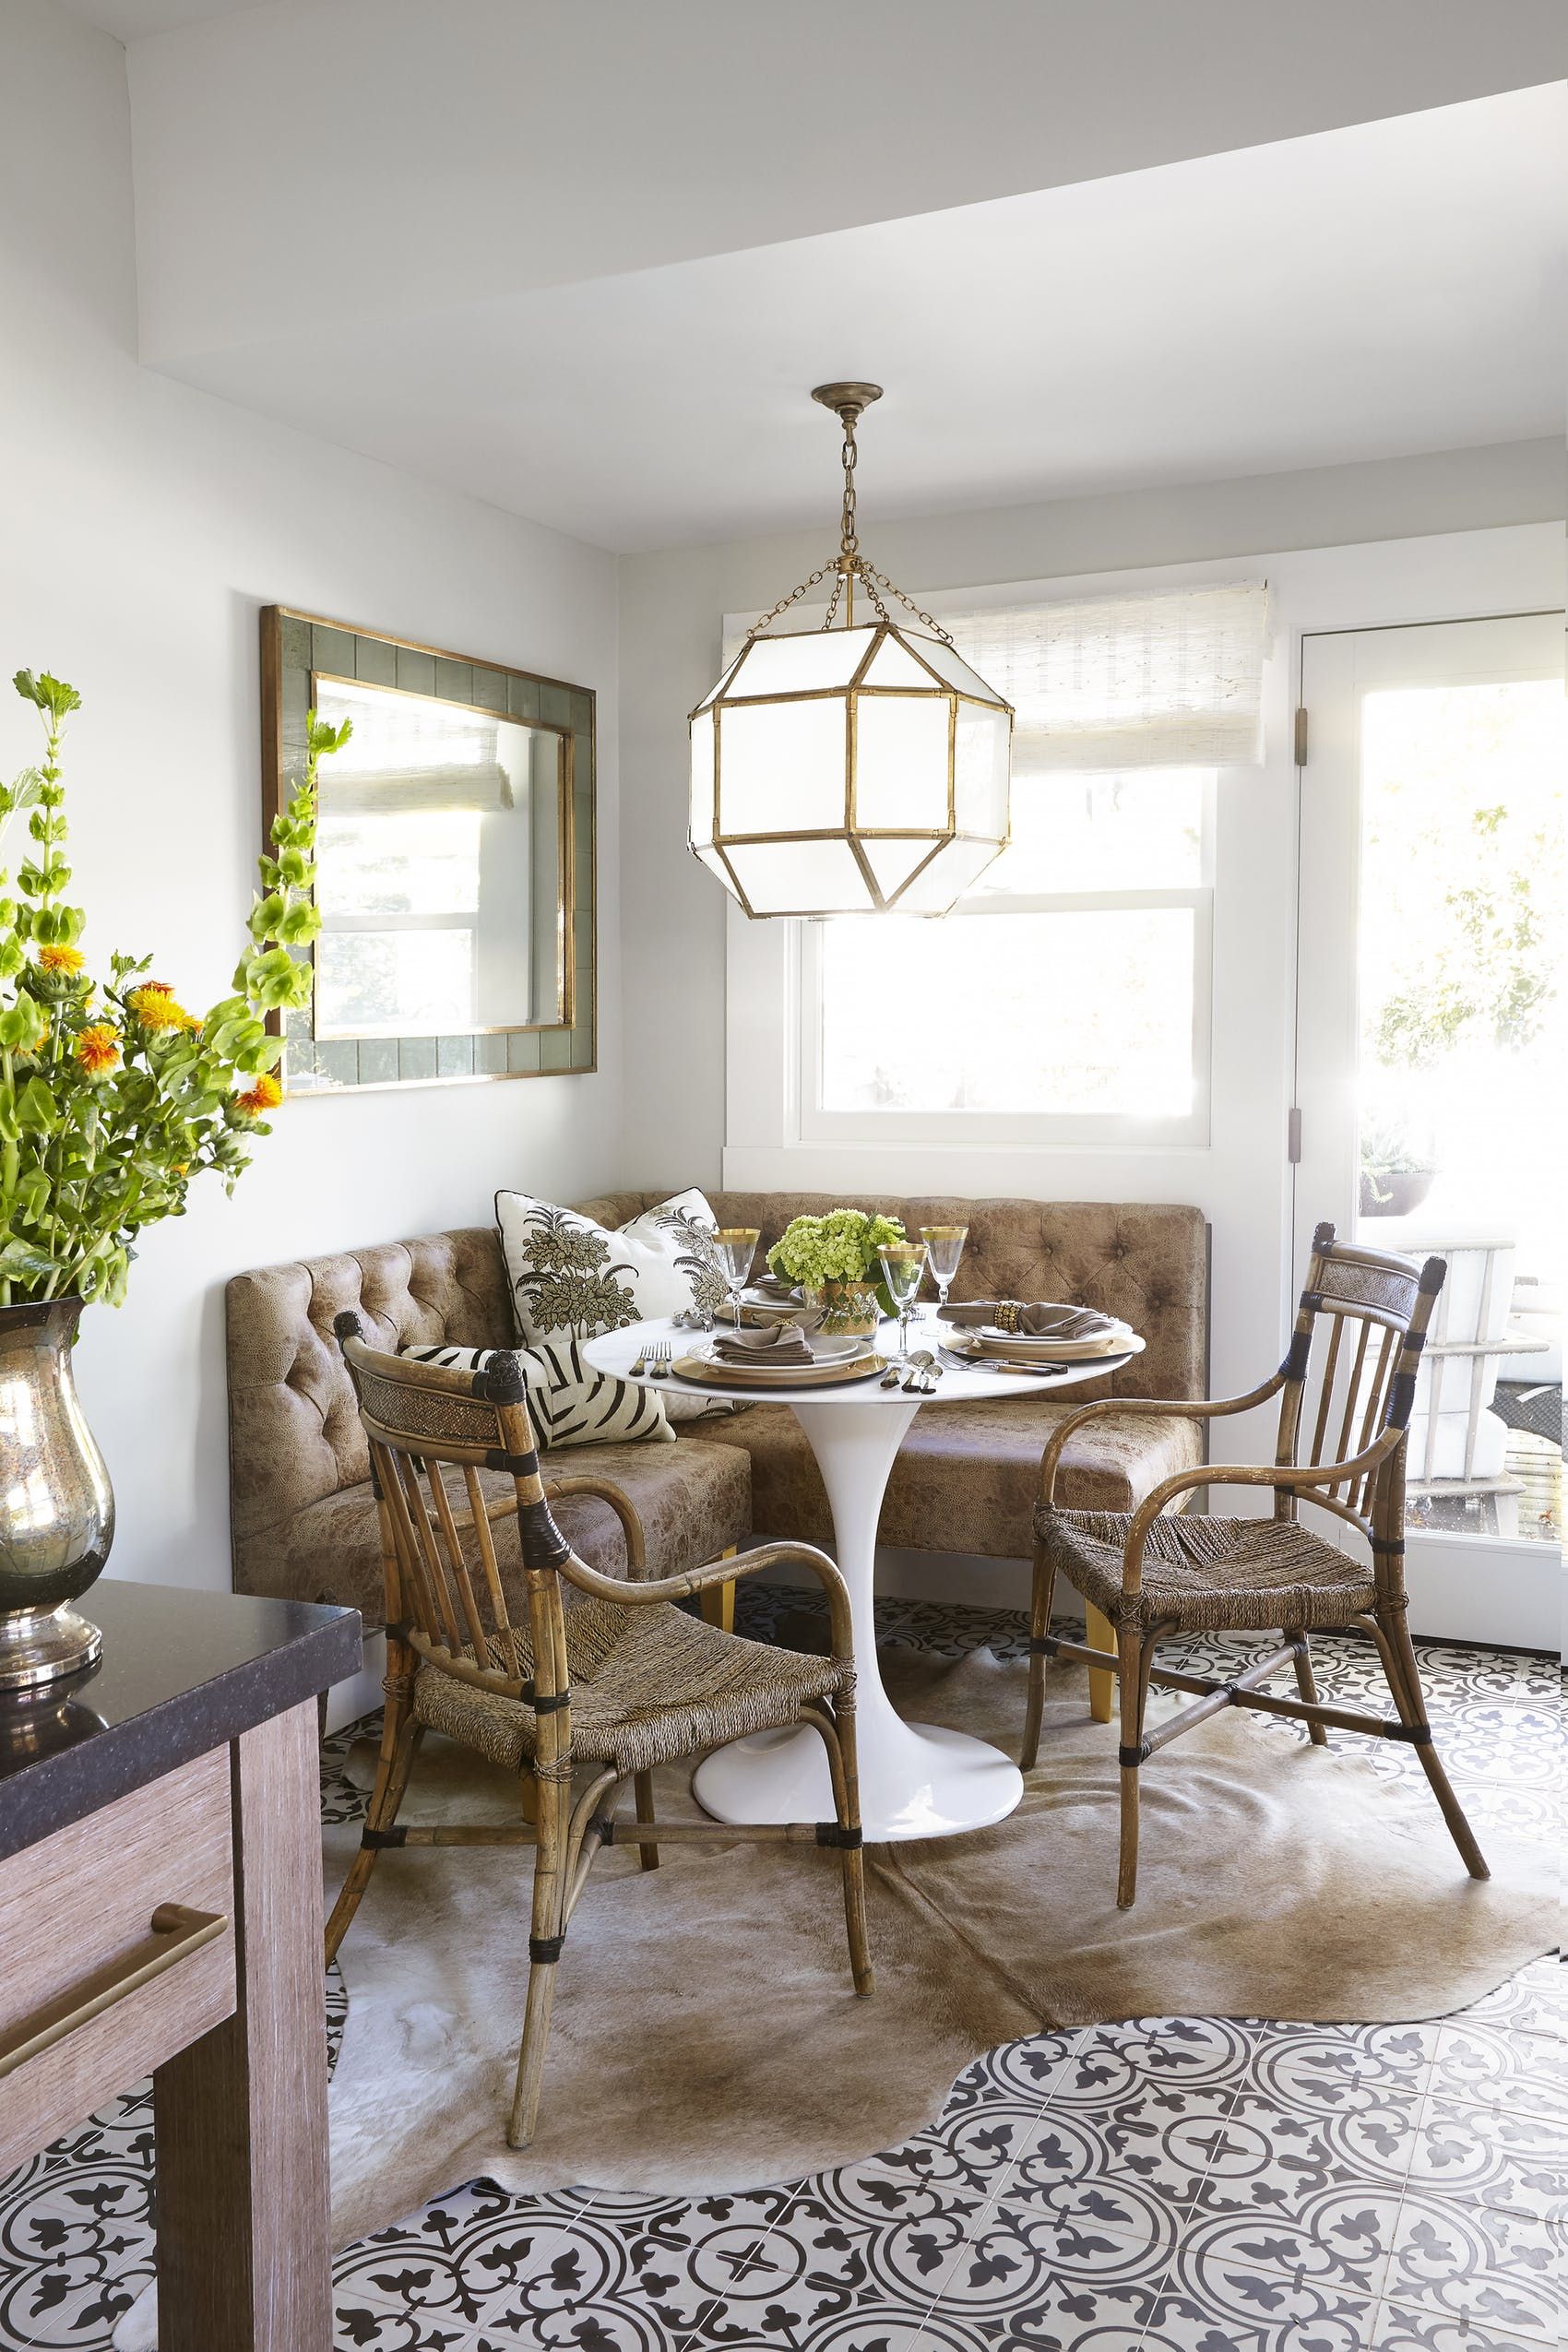 25 Charming Banquette Seating Ideas, Banquette Dining Table